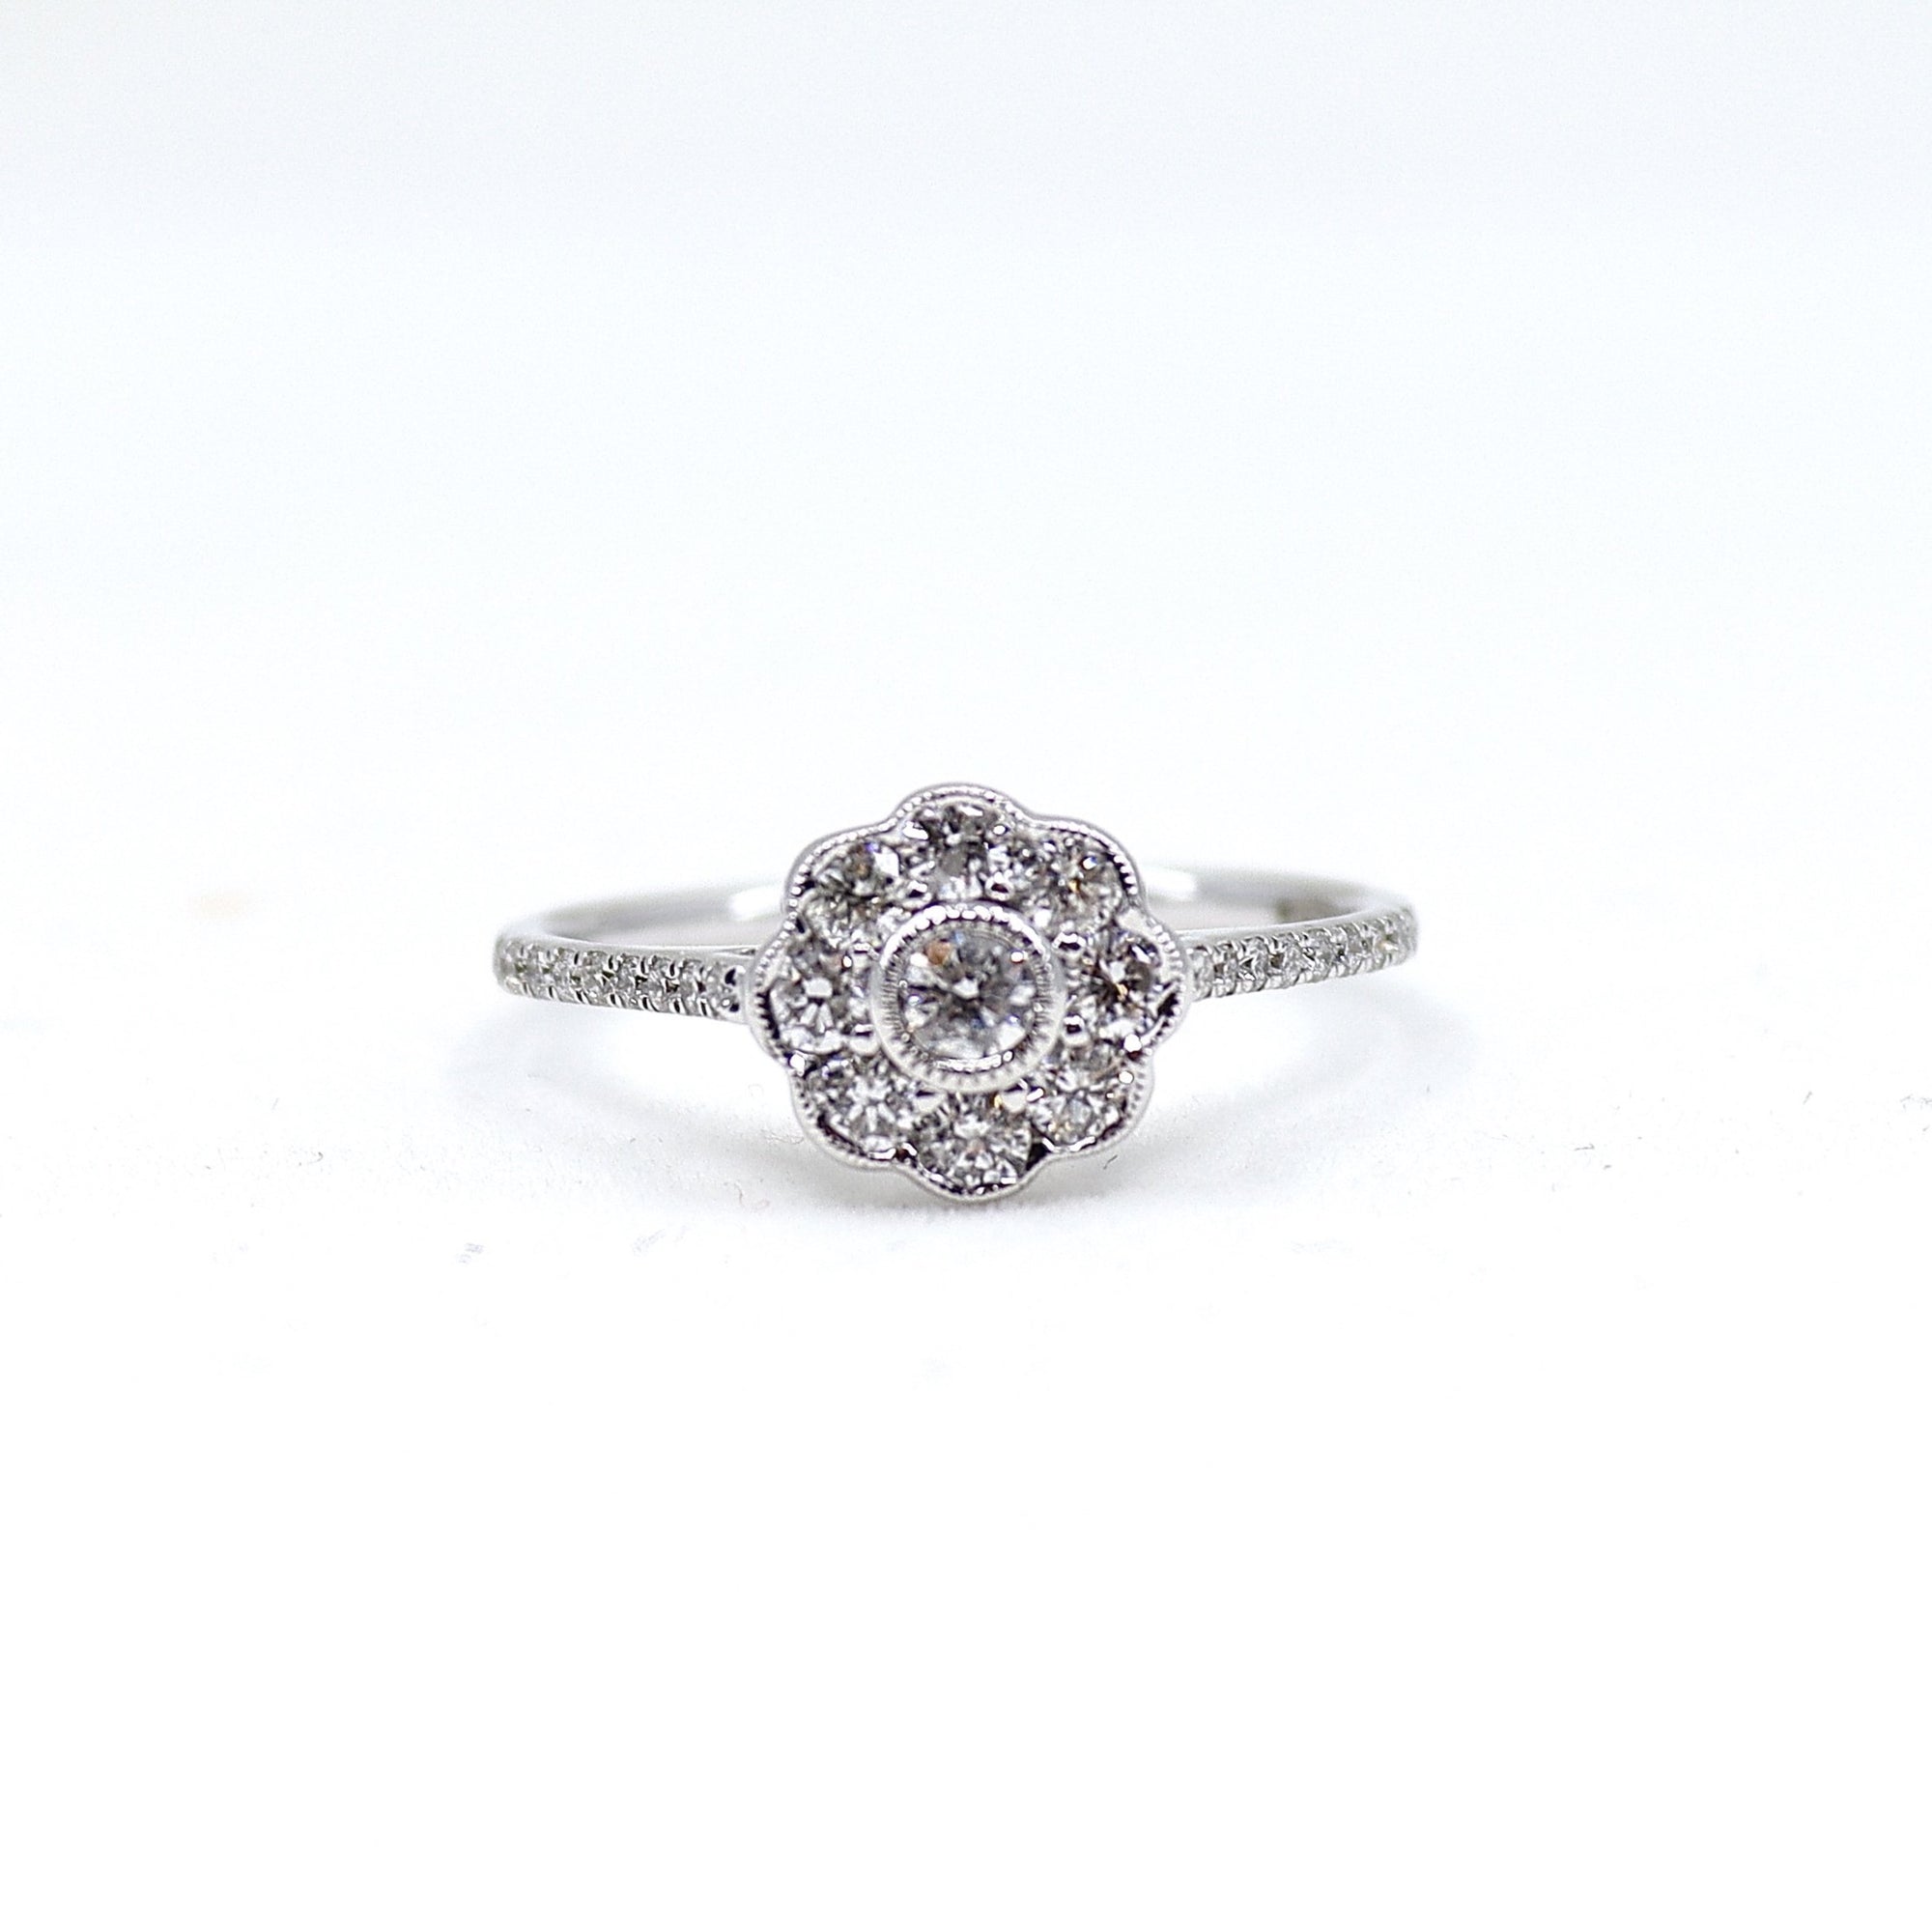 Boutique diamond ring in white gold